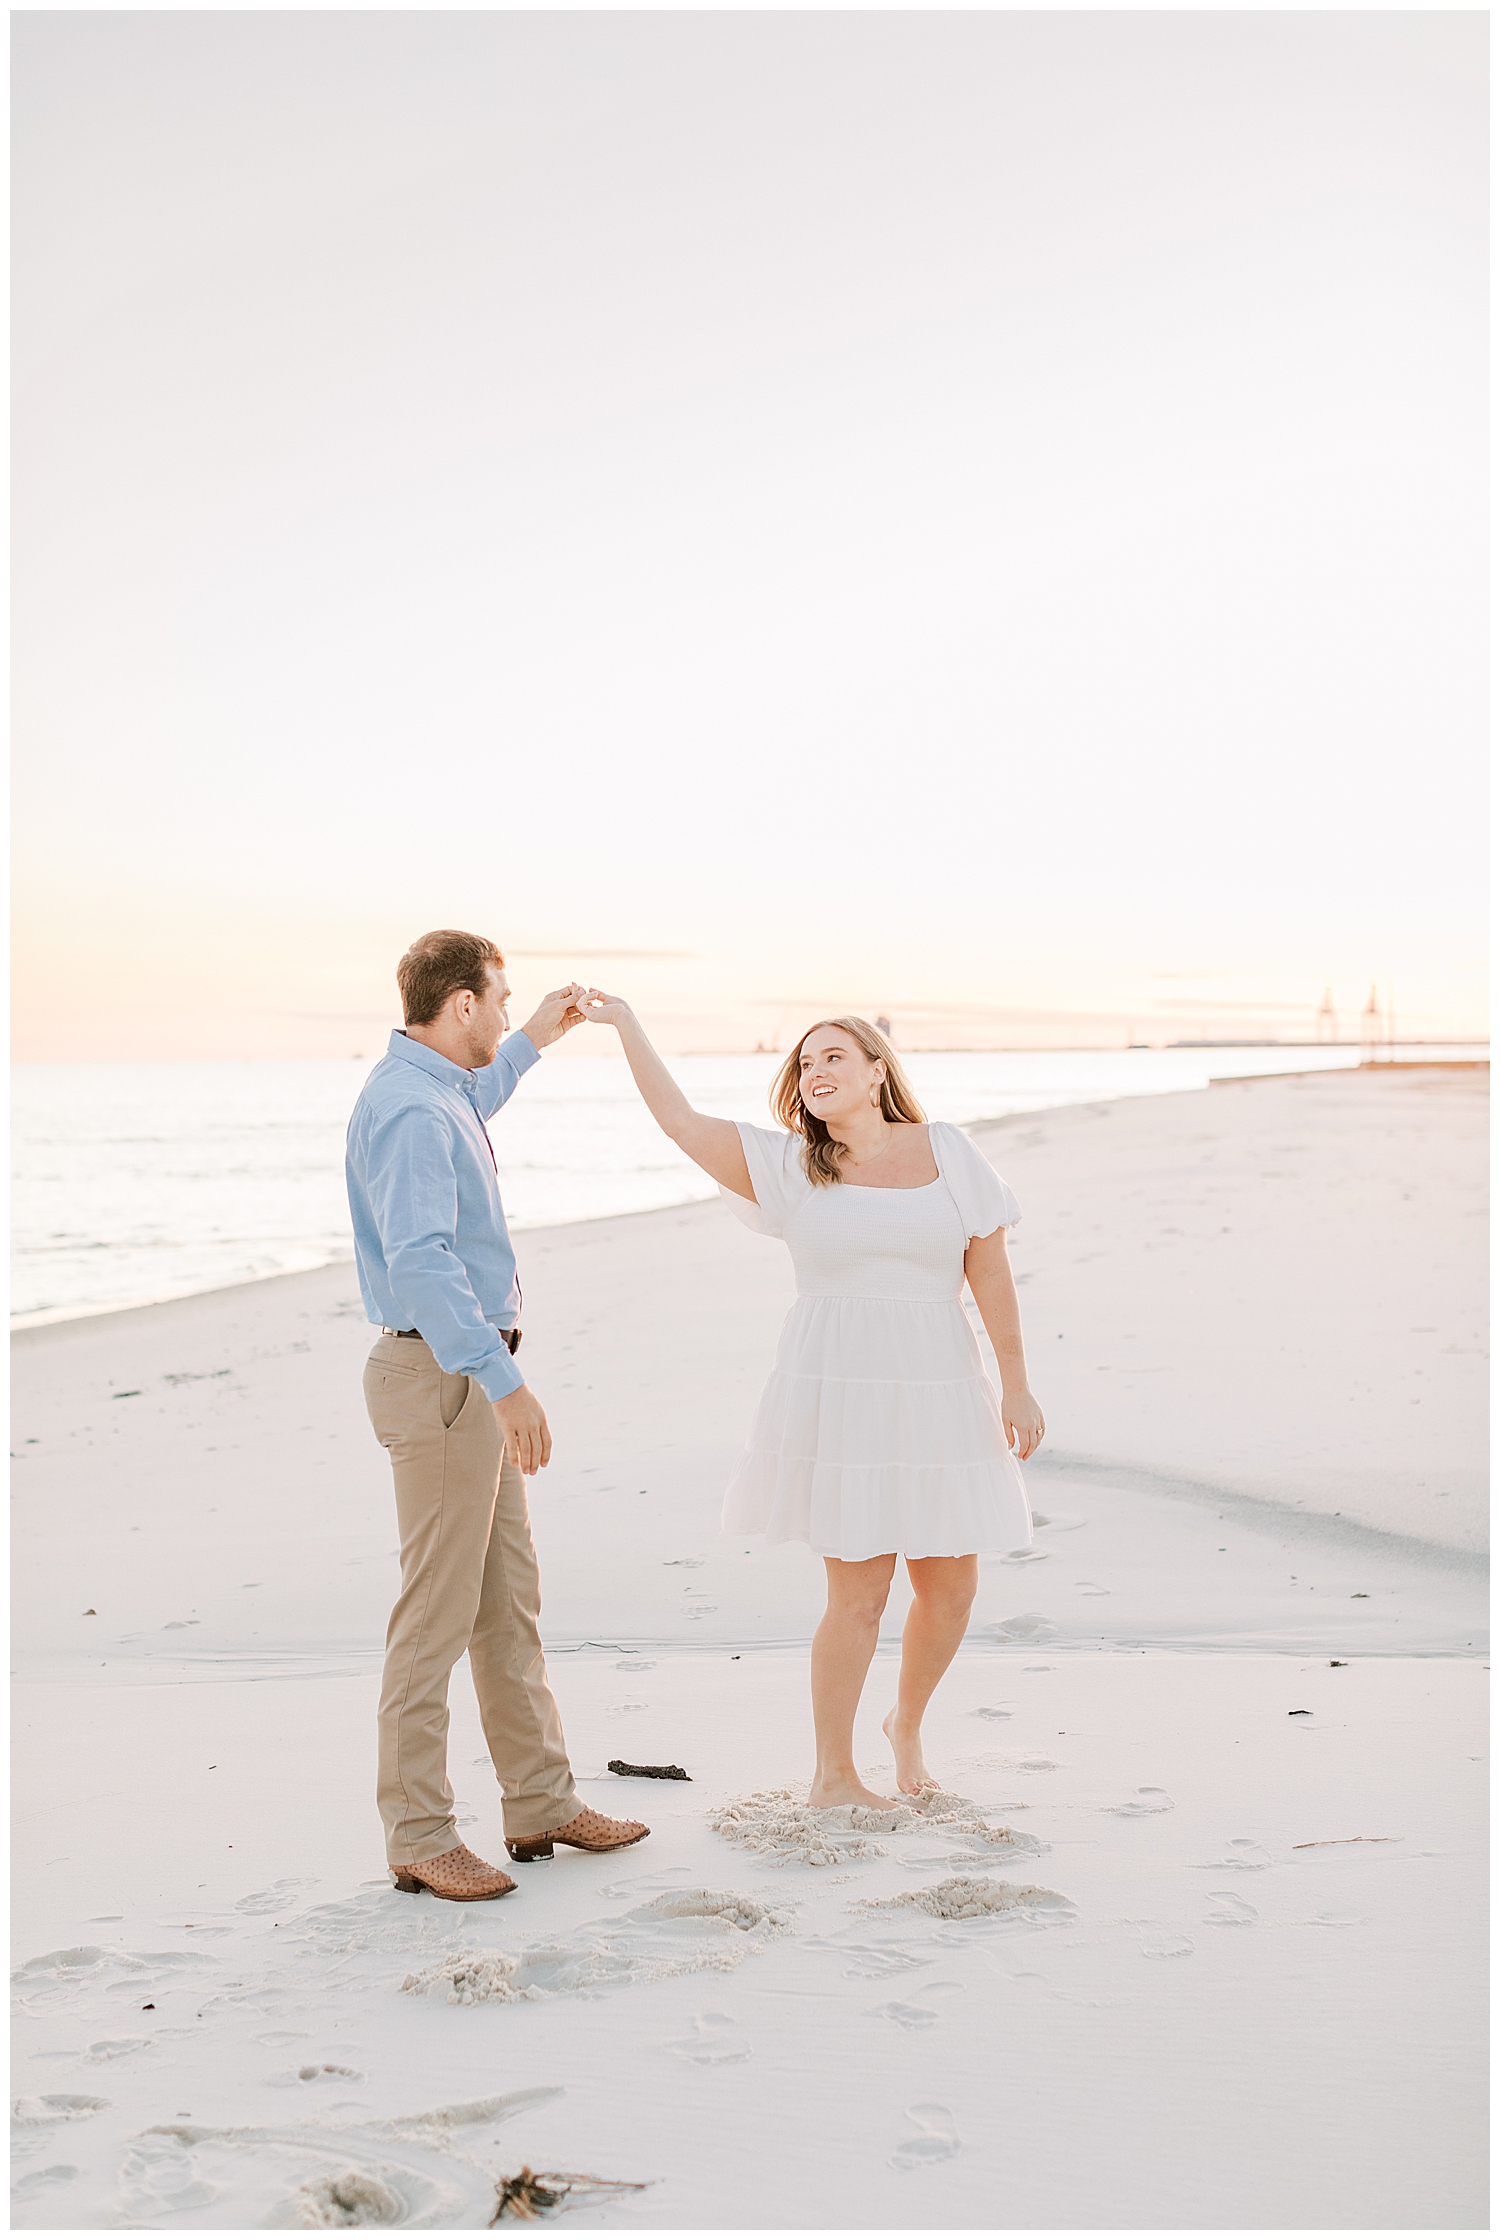 A couple dances on the beach in Gulfport.